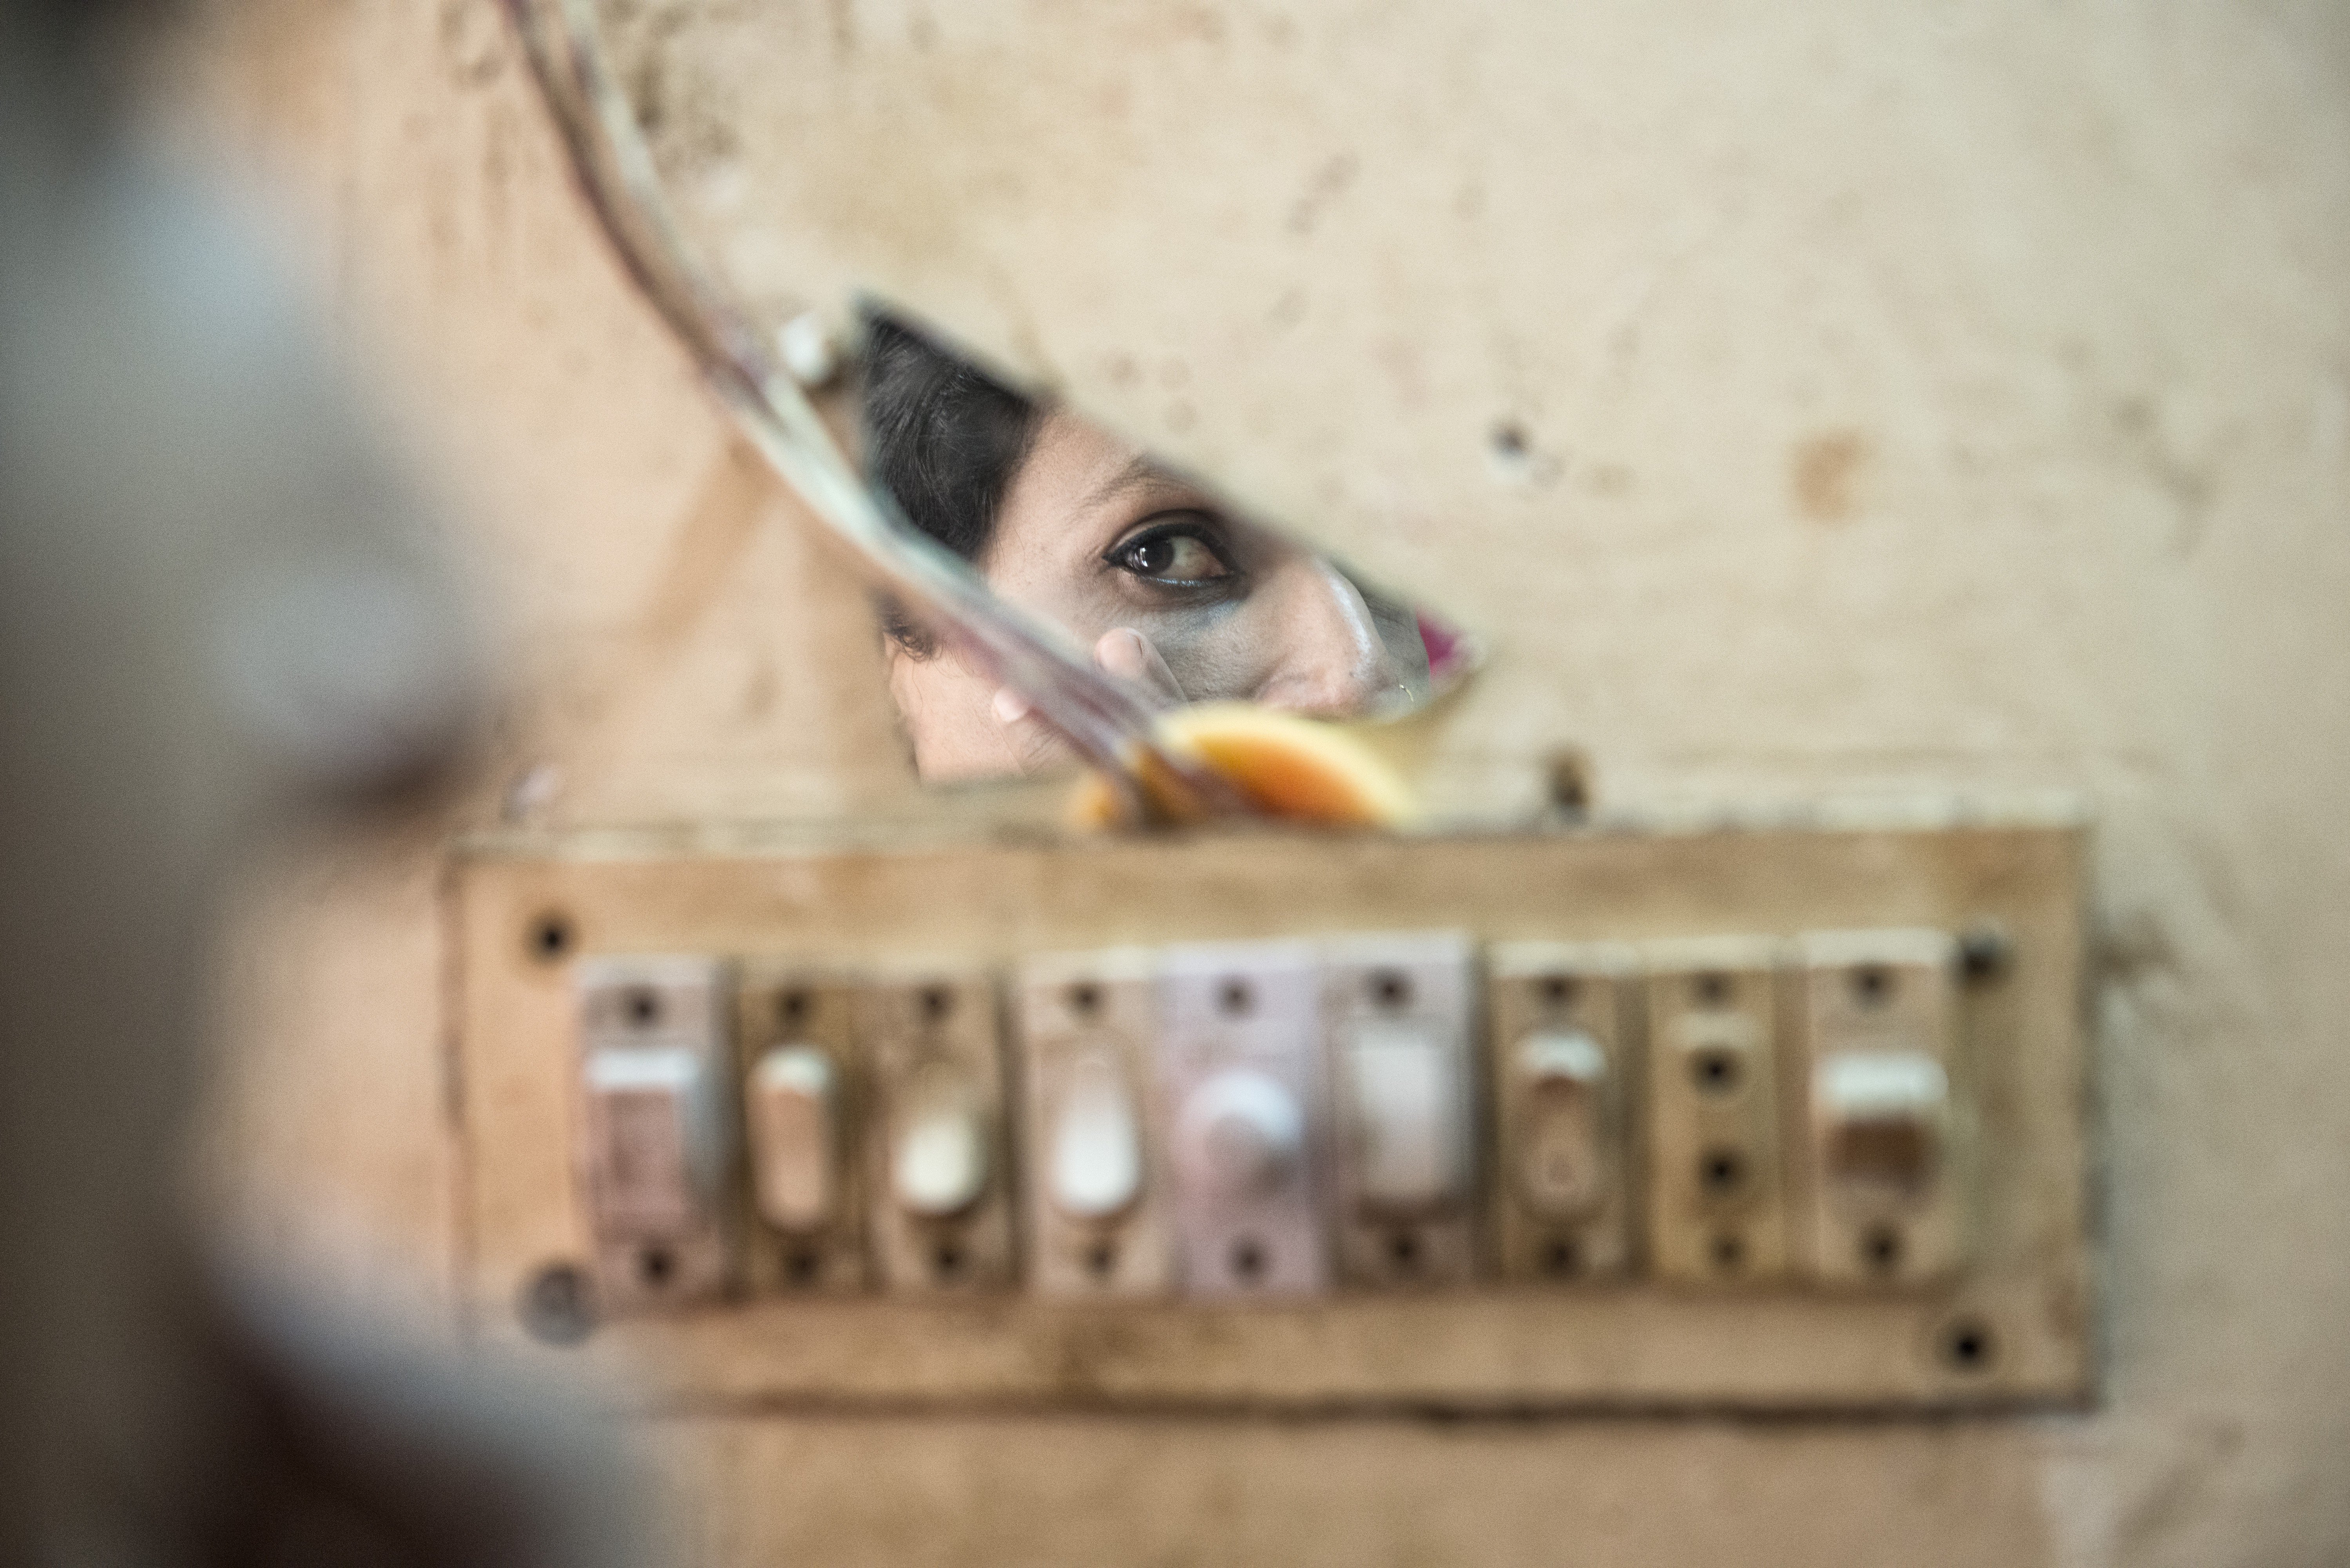 Shanta, a hijra from Bangladesh, applies her make-up in front of a fragment of mirror in the attic she rents with other transgenders. Photo: Zigor Aldama